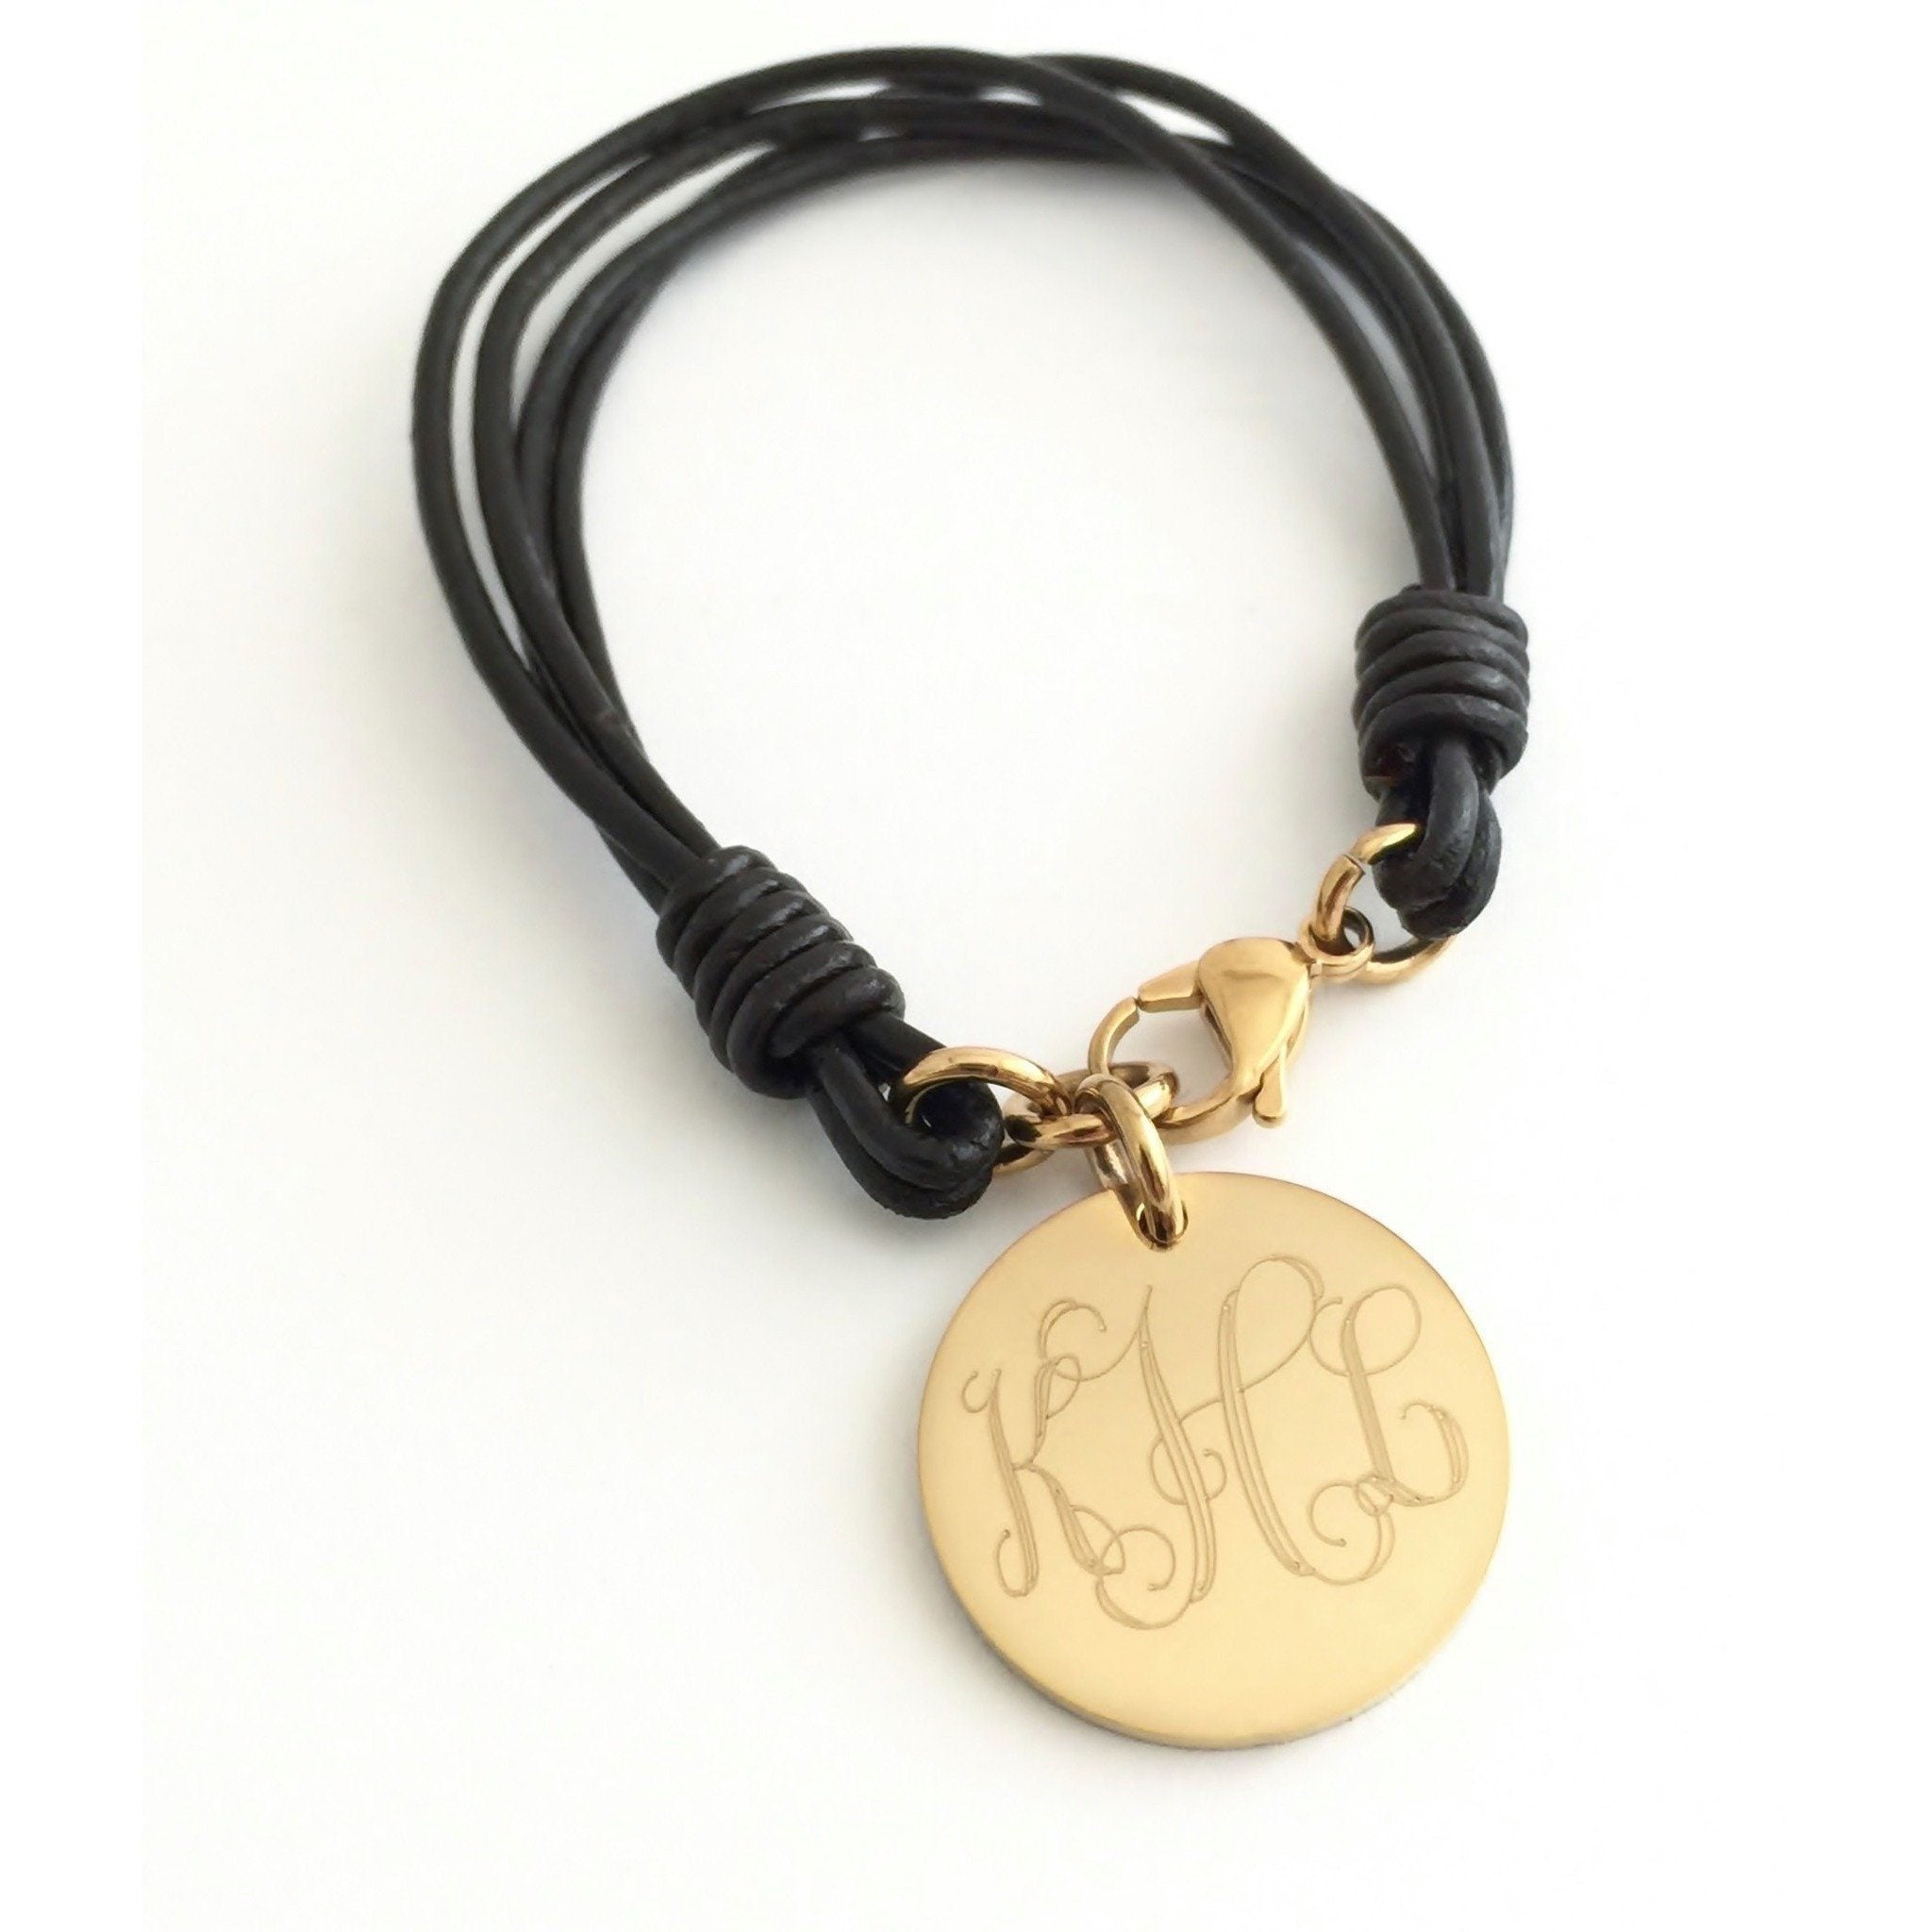 Leather Monogram Bracelet With Gold Charm - The Personal Exchange